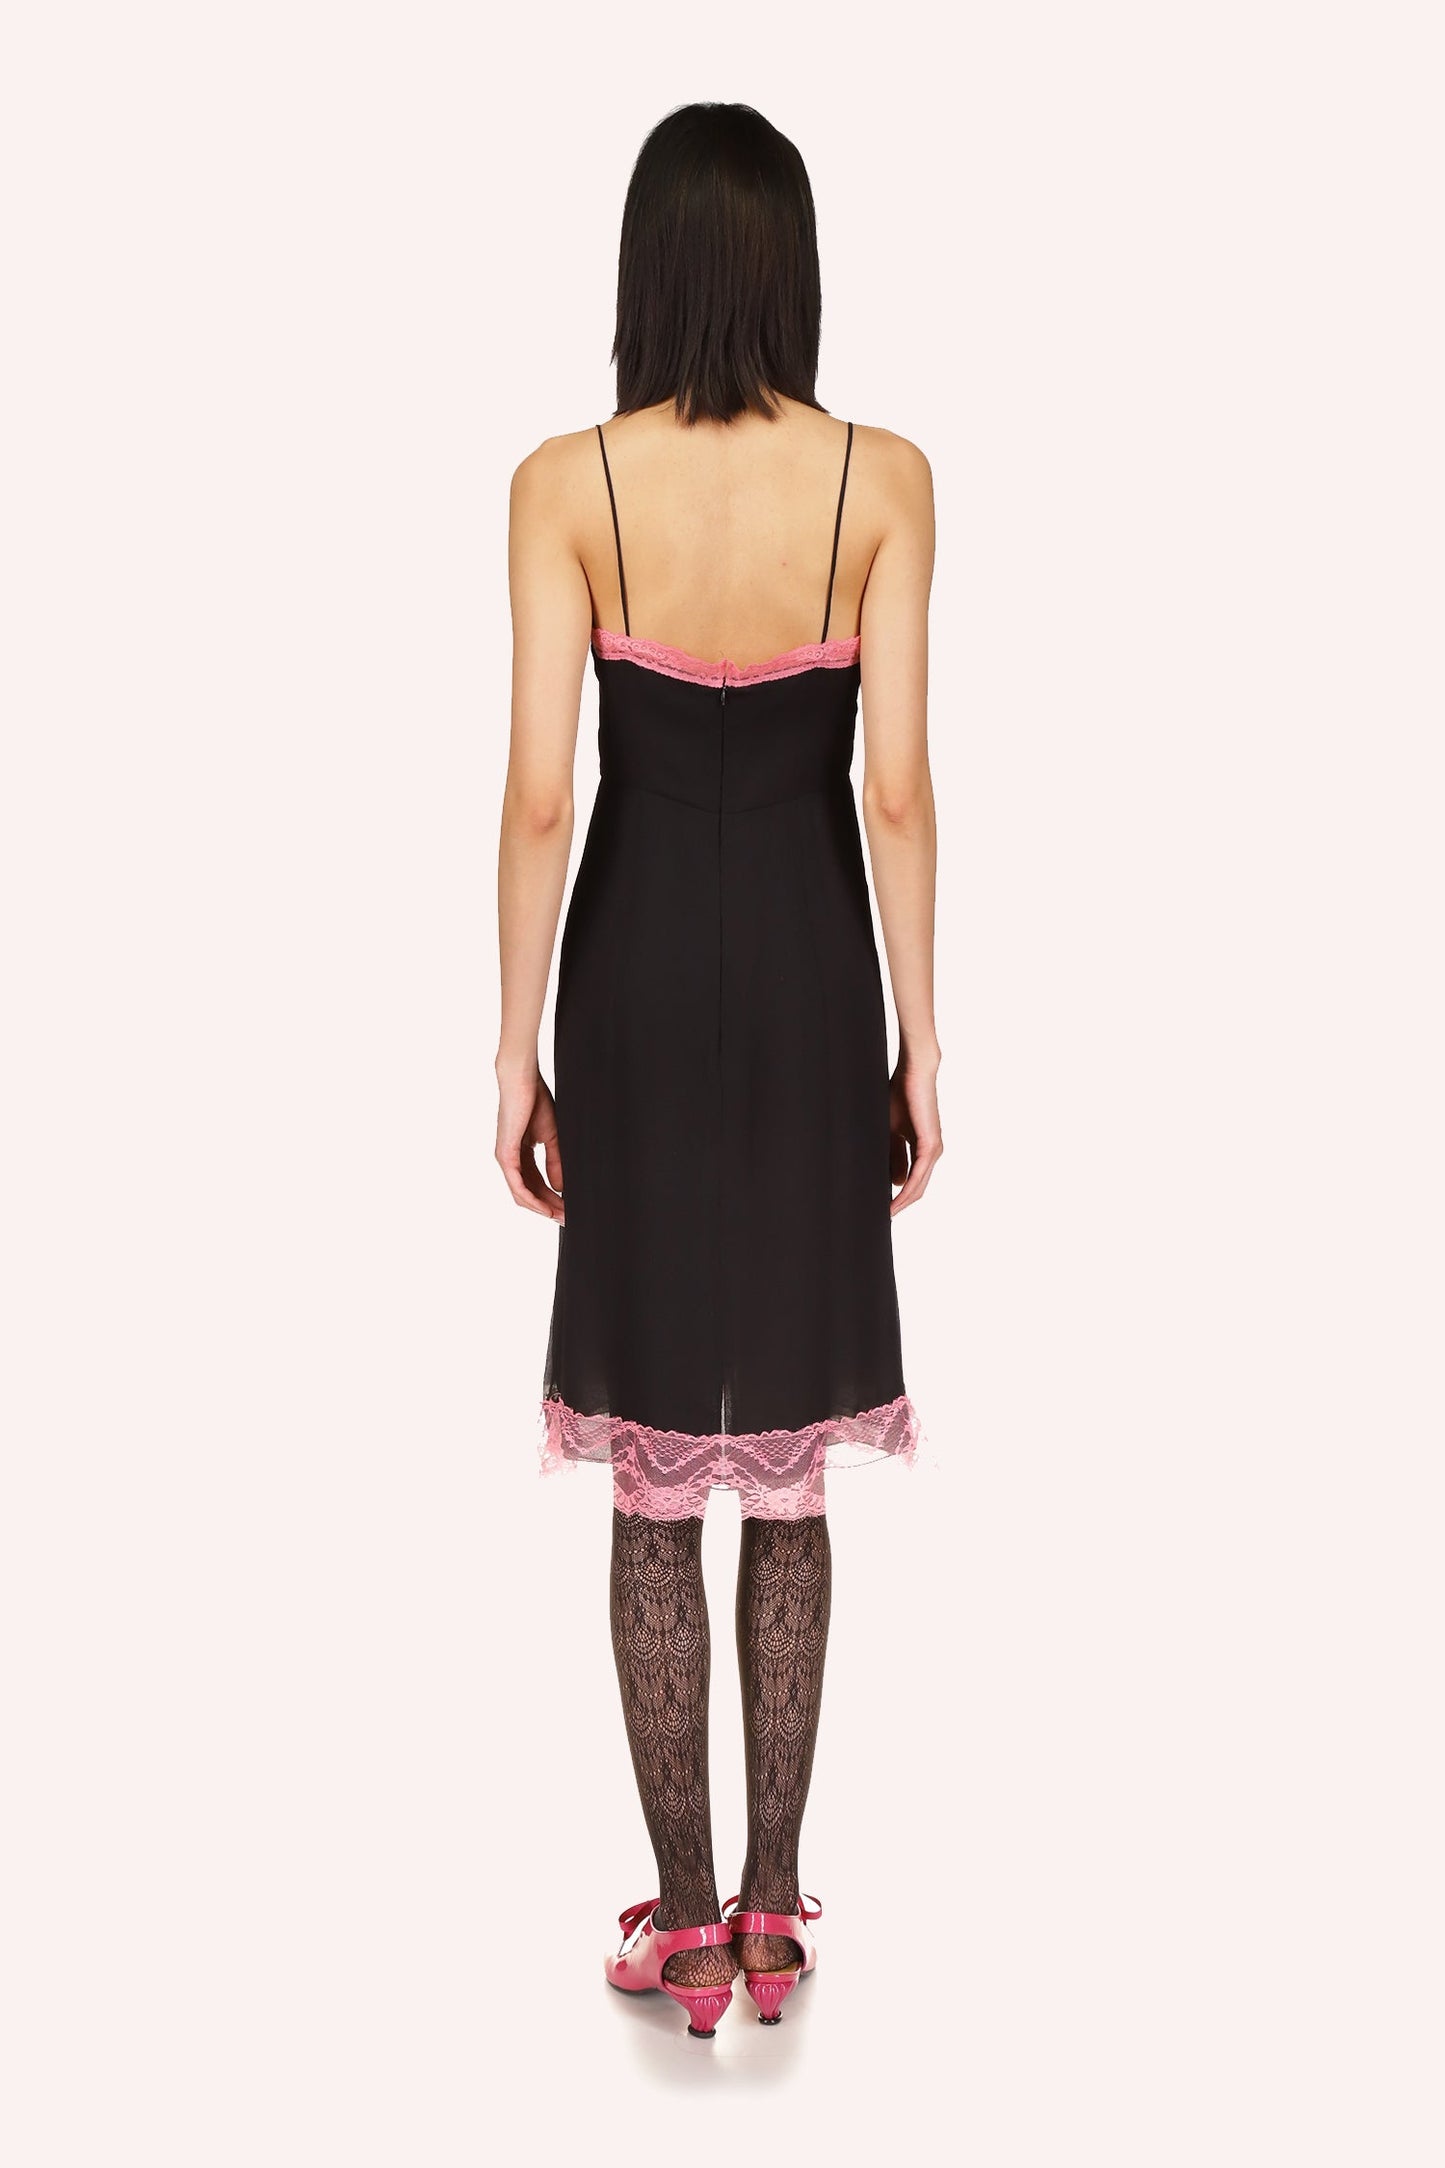 Lingerie Chiffon Slip Dress Rose, black with rose highlight lace a top and bottom zipper on back